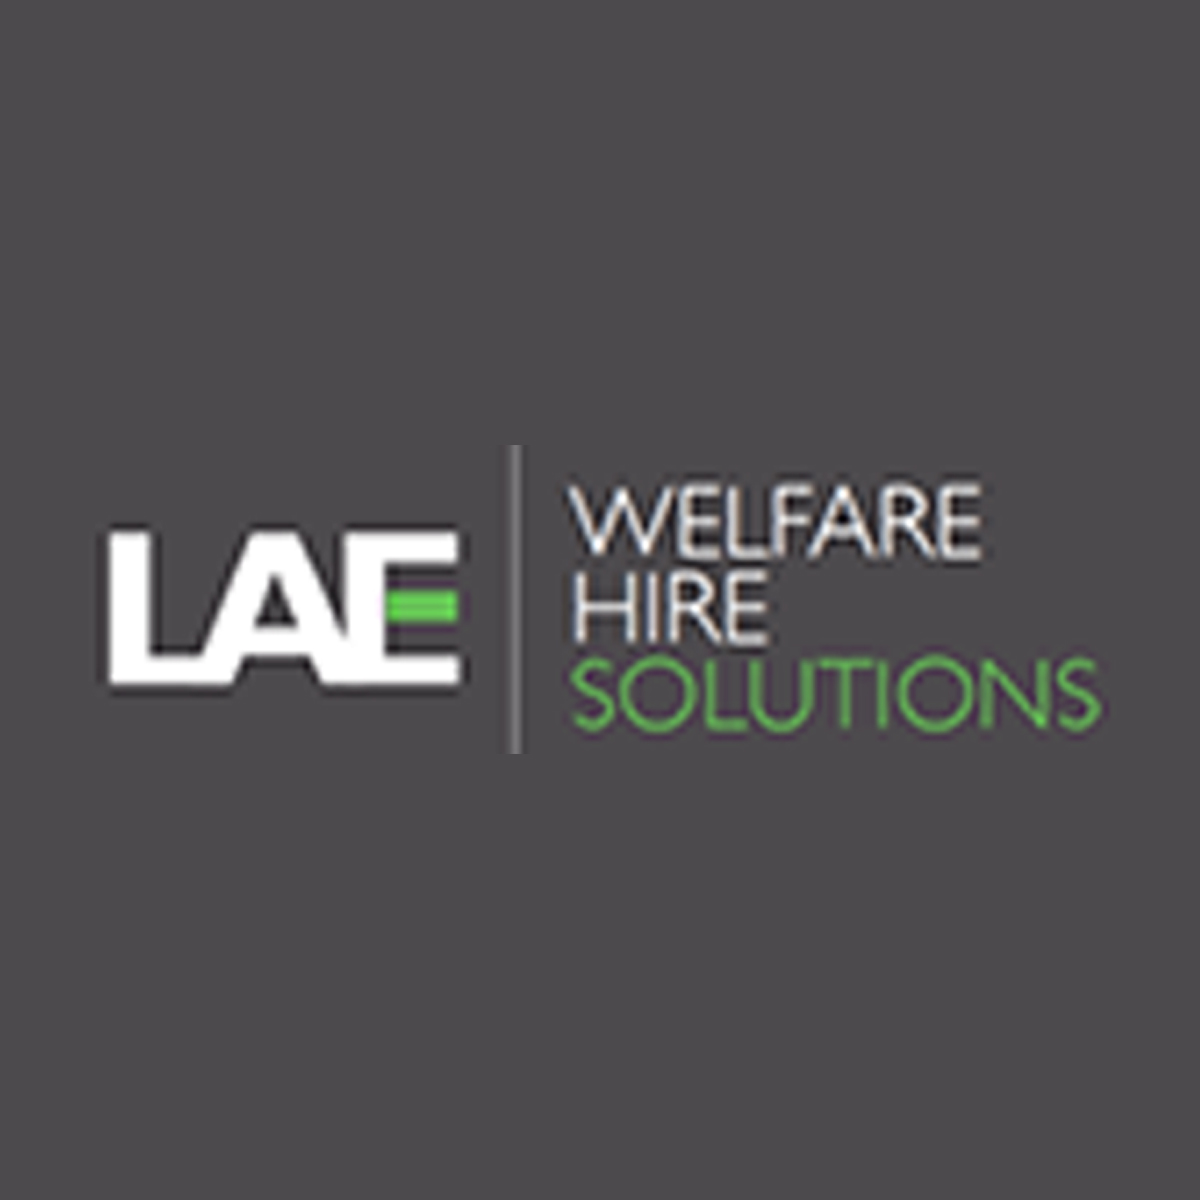 LAE Welfare Hire Solutions